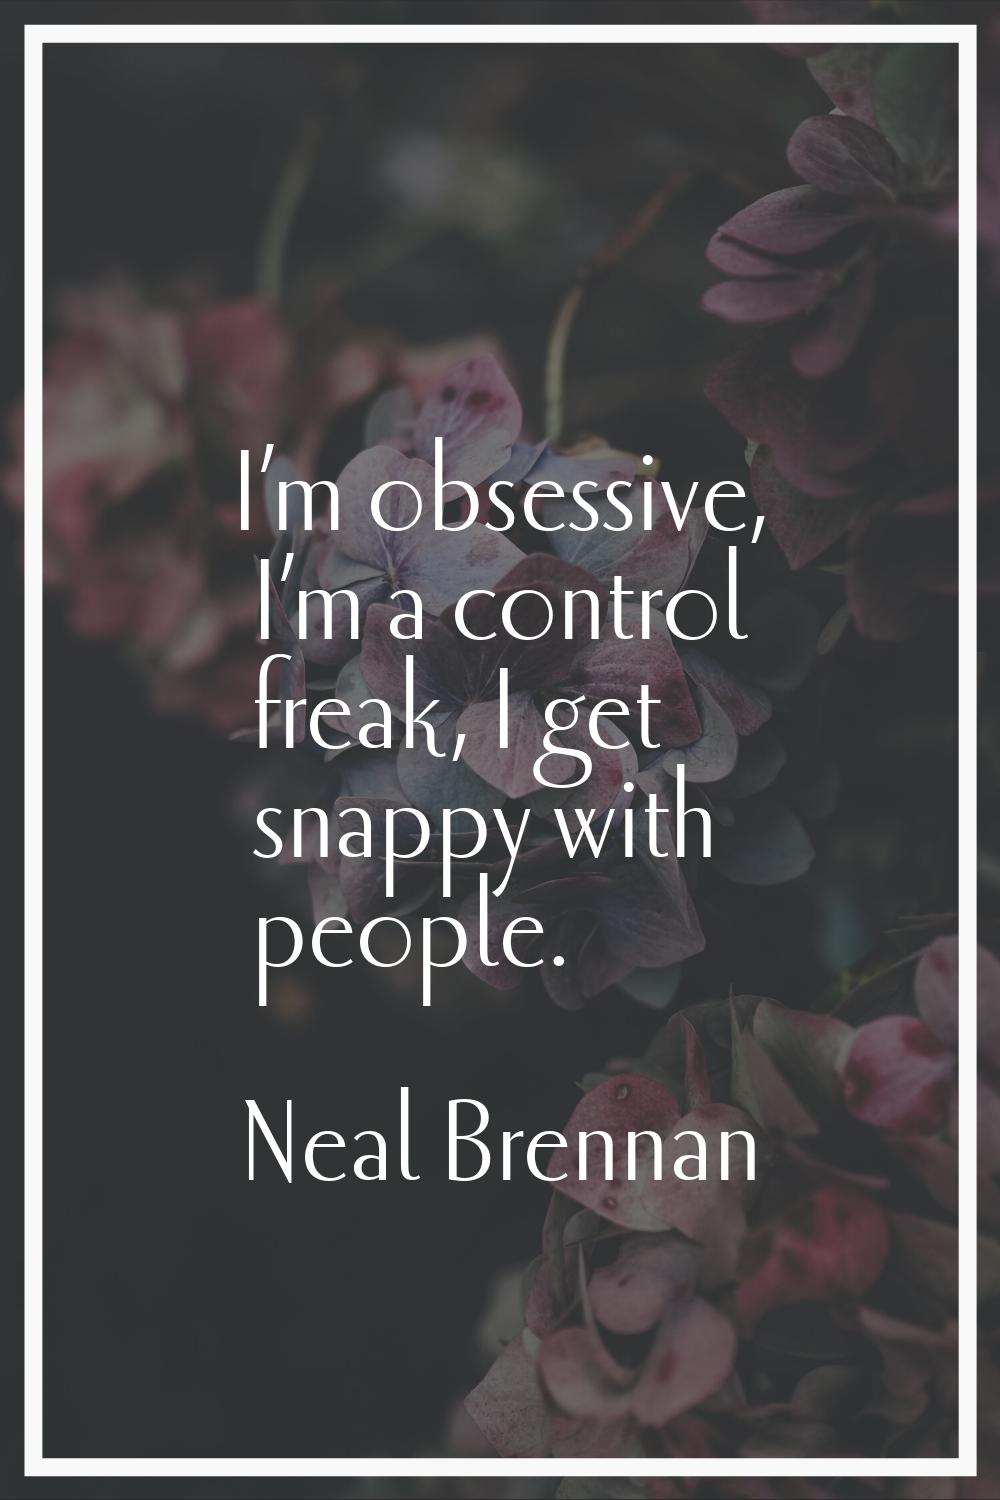 I’m obsessive, I’m a control freak, I get snappy with people.